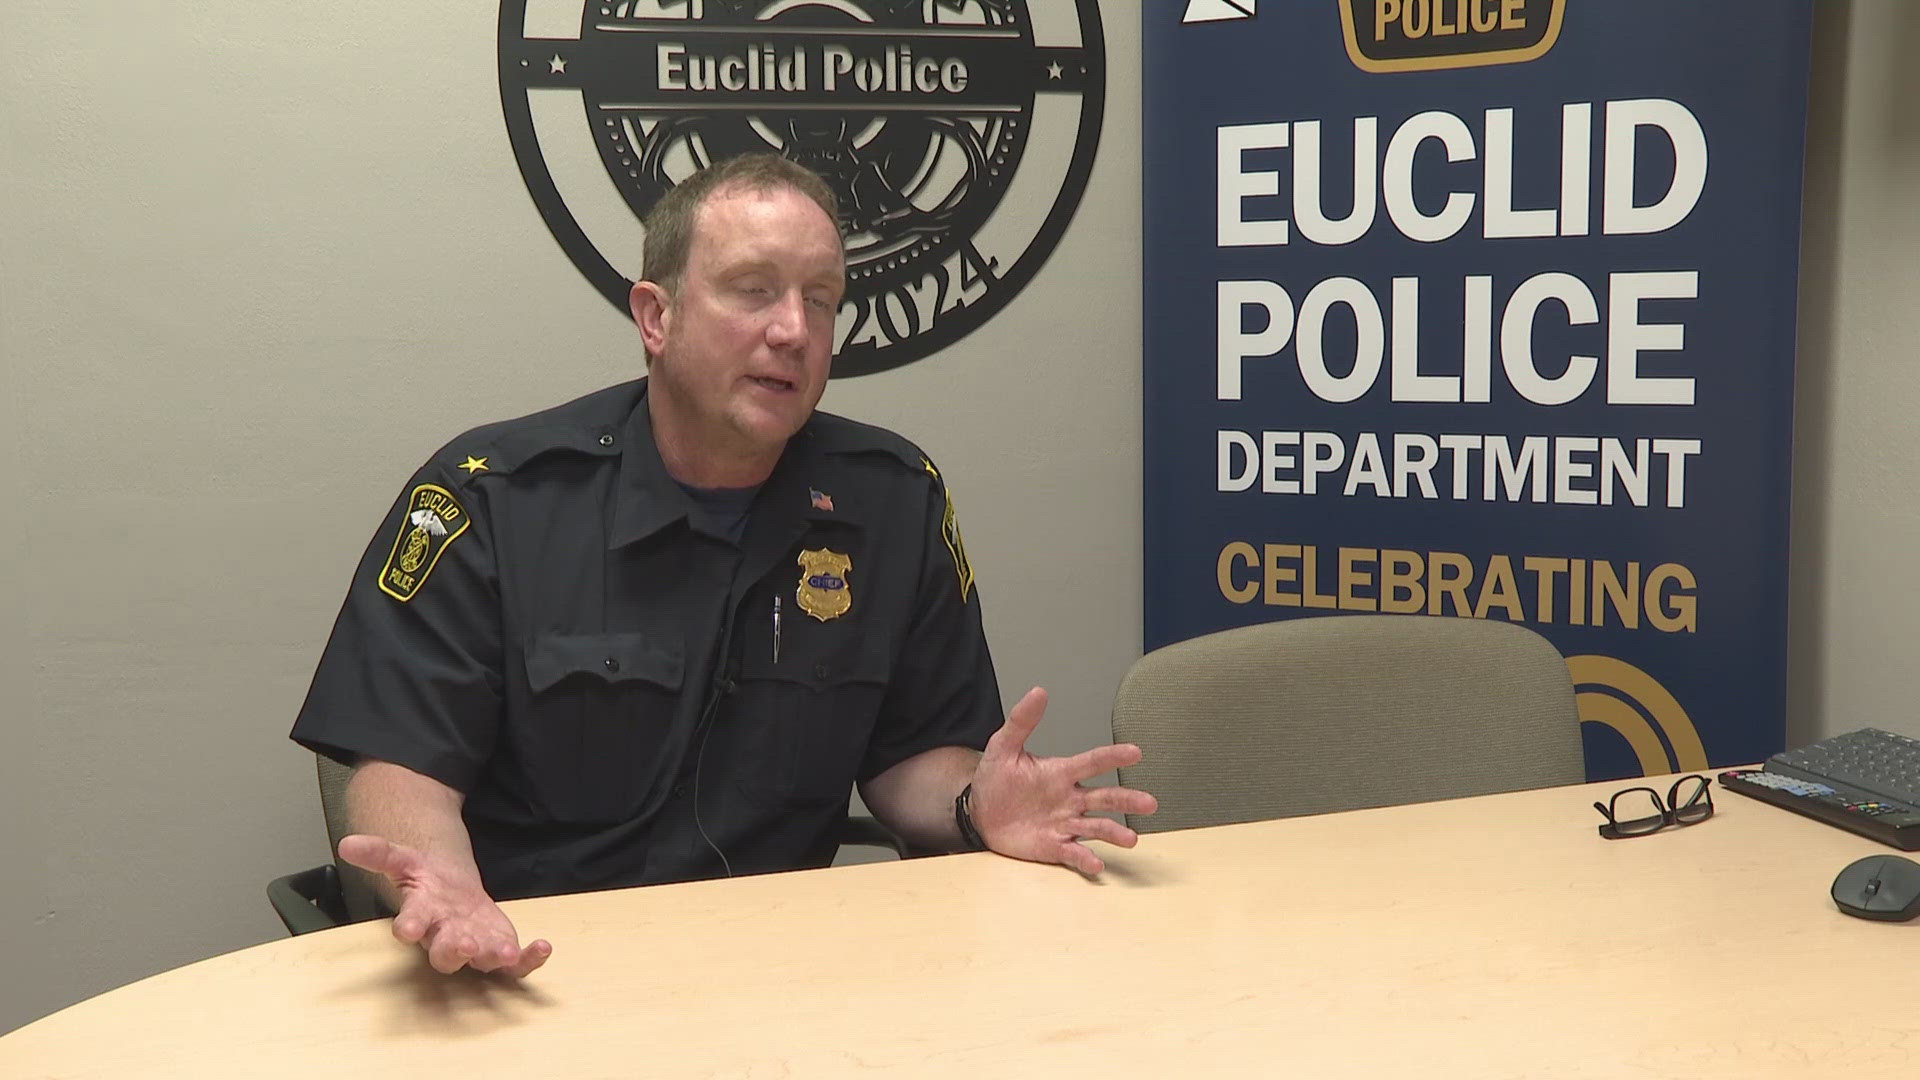 Ritter's death comes less than two months after the killing of Euclid Officer Jacob Derbin.